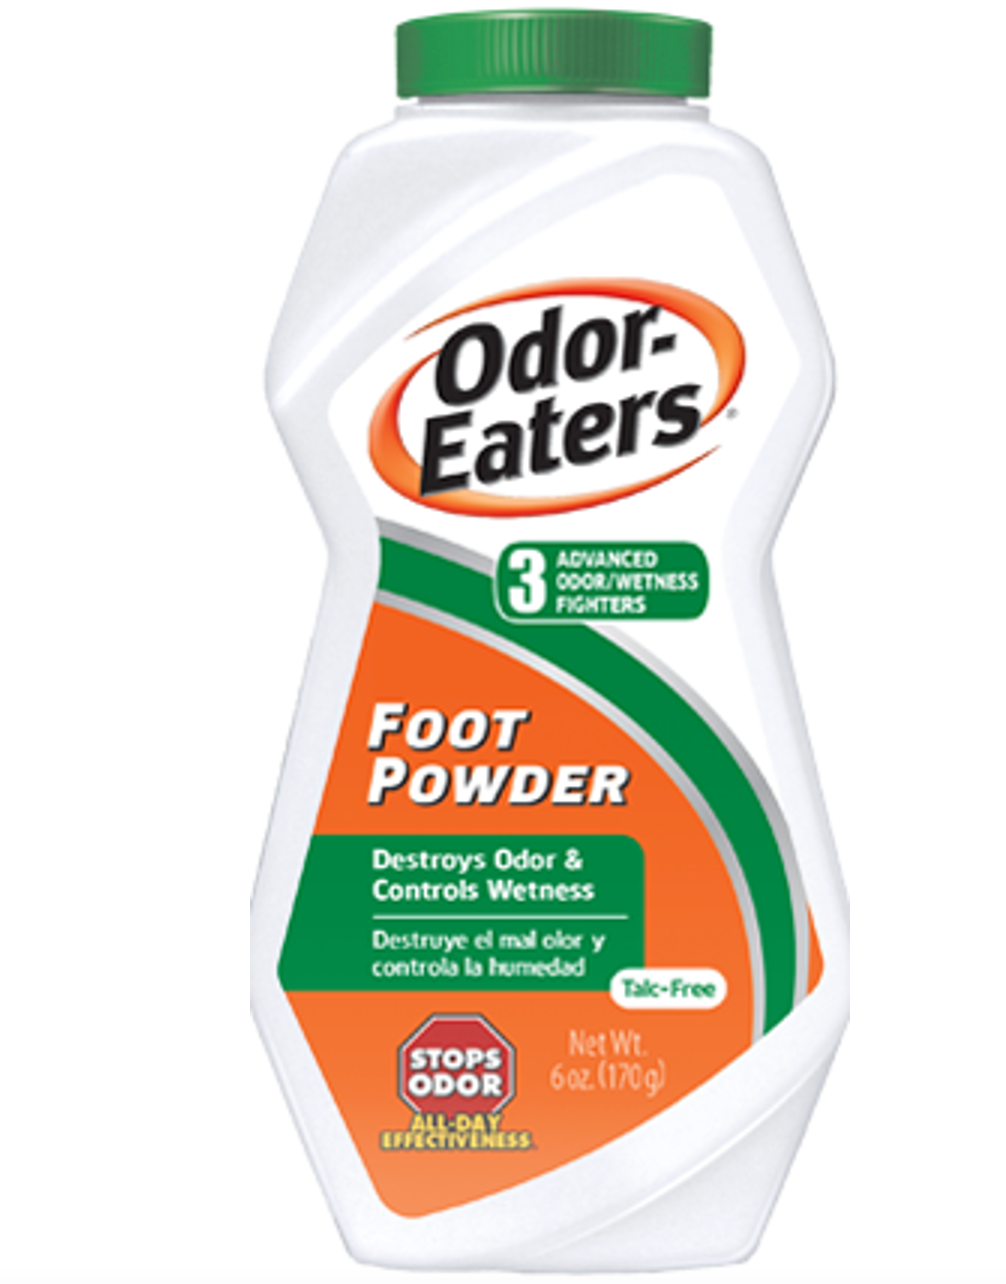 Daily OTC Pearl: Odor-Eaters